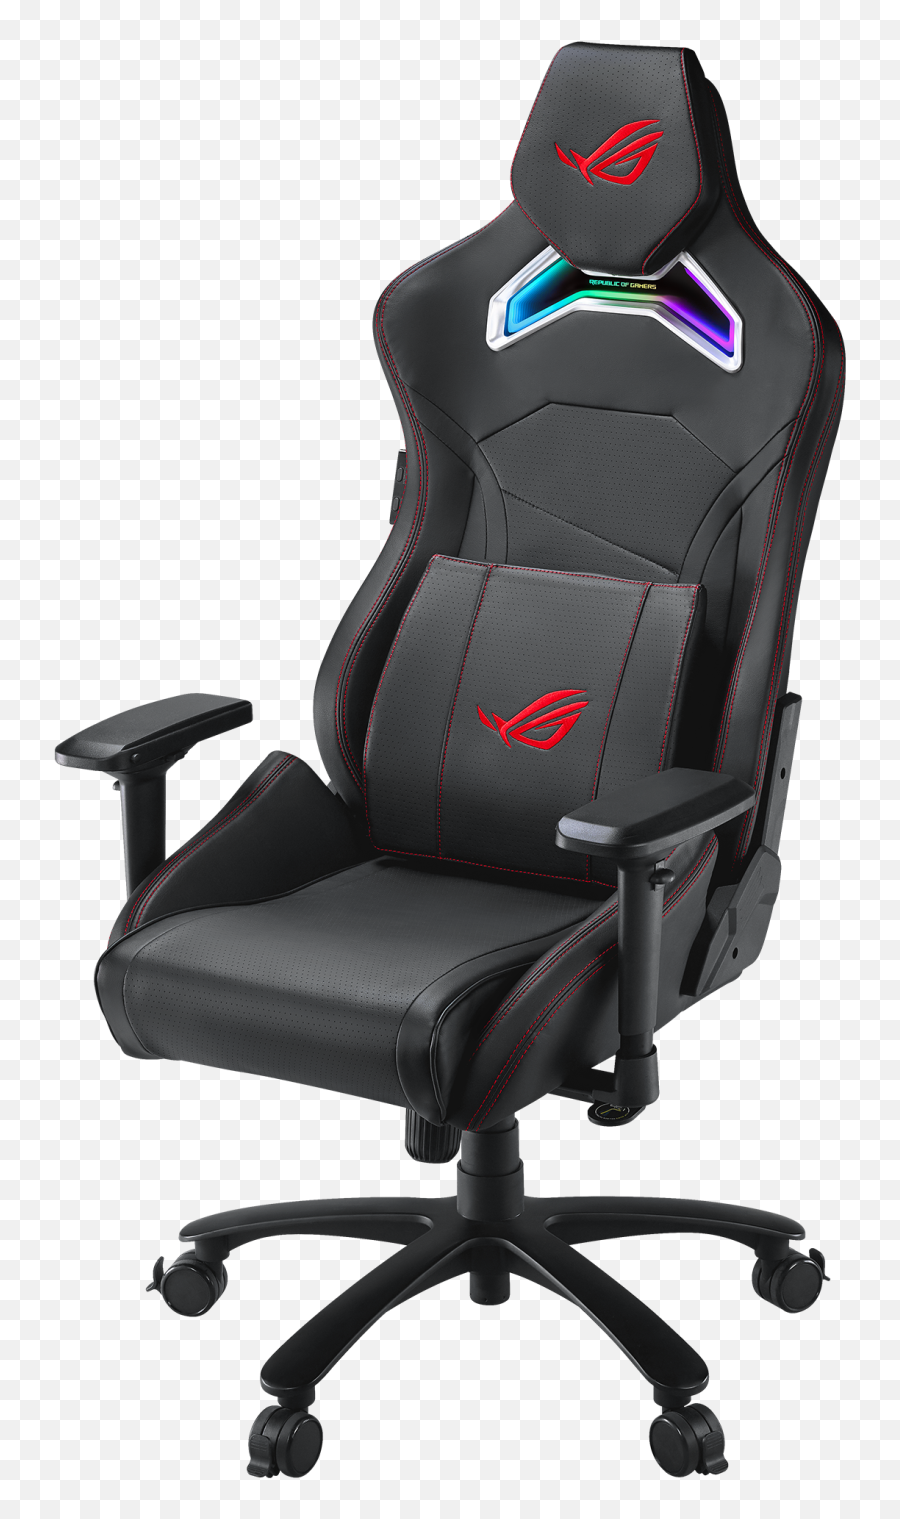 Rog Chariot Gaming Chair Gears Gaming Apparel Bags - Gaming Chair Rog Chariot Rgb Emoji,Work Complite Emoticons